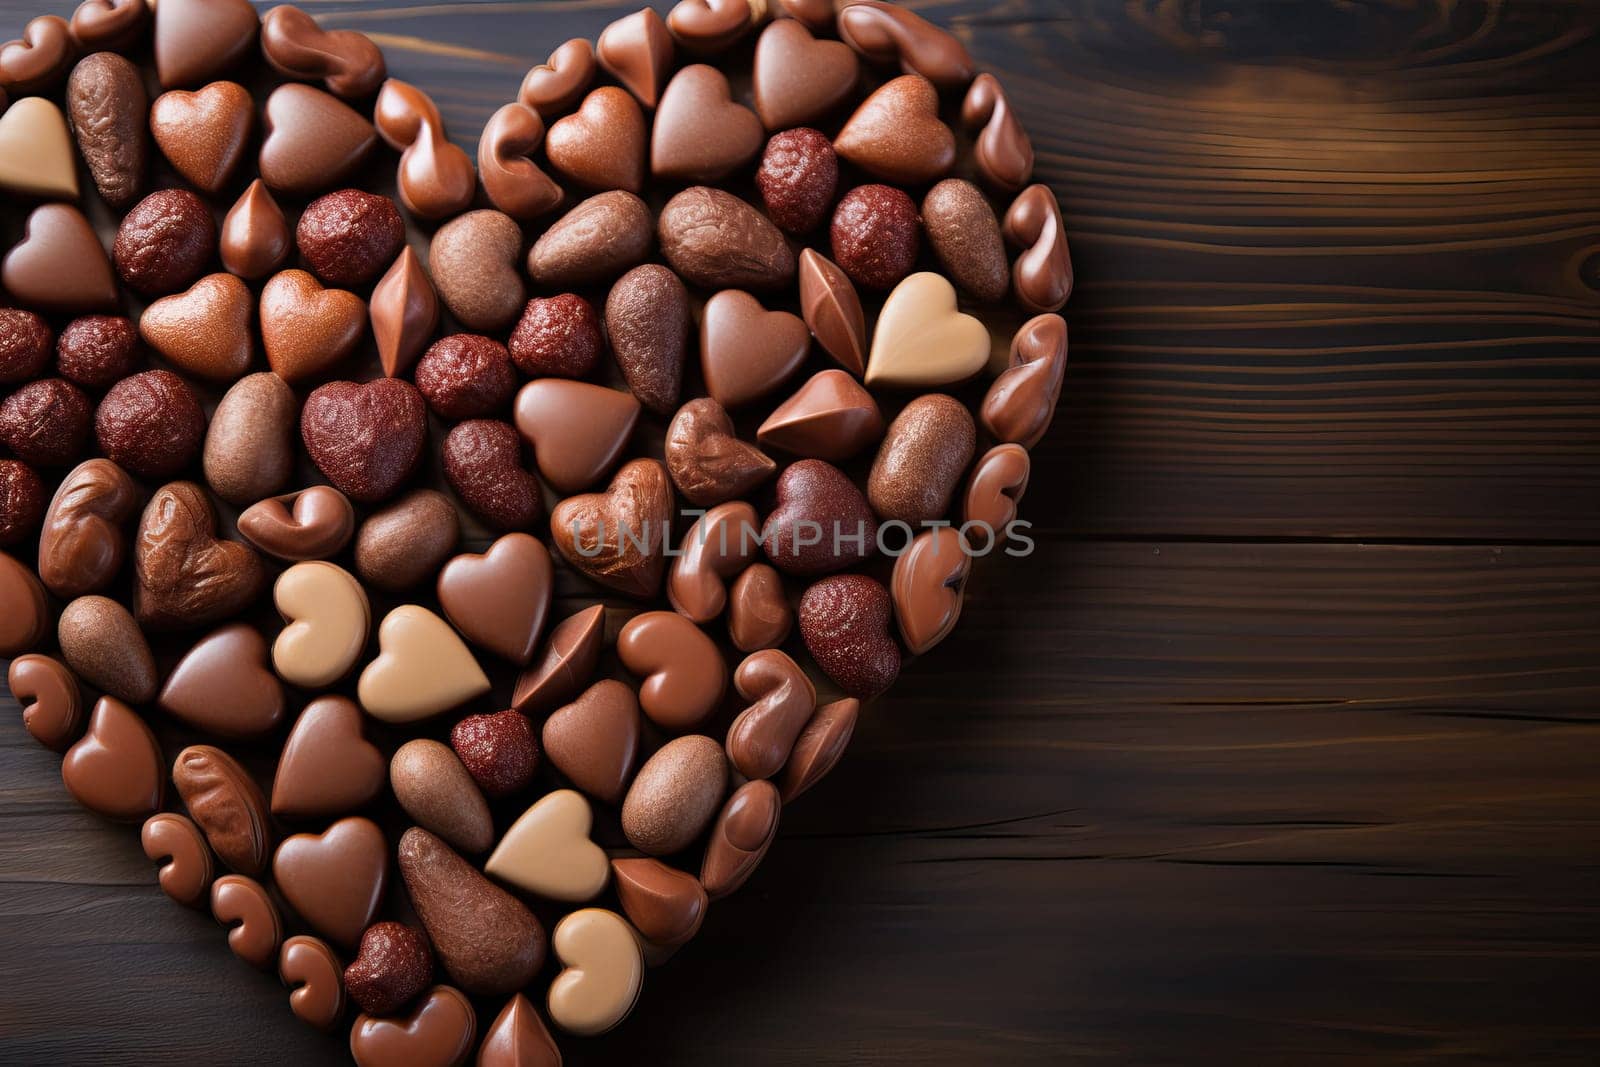 Chocolate heart for a gift, chocolate heart made of chocolate candies on a wooden background. by Niko_Cingaryuk